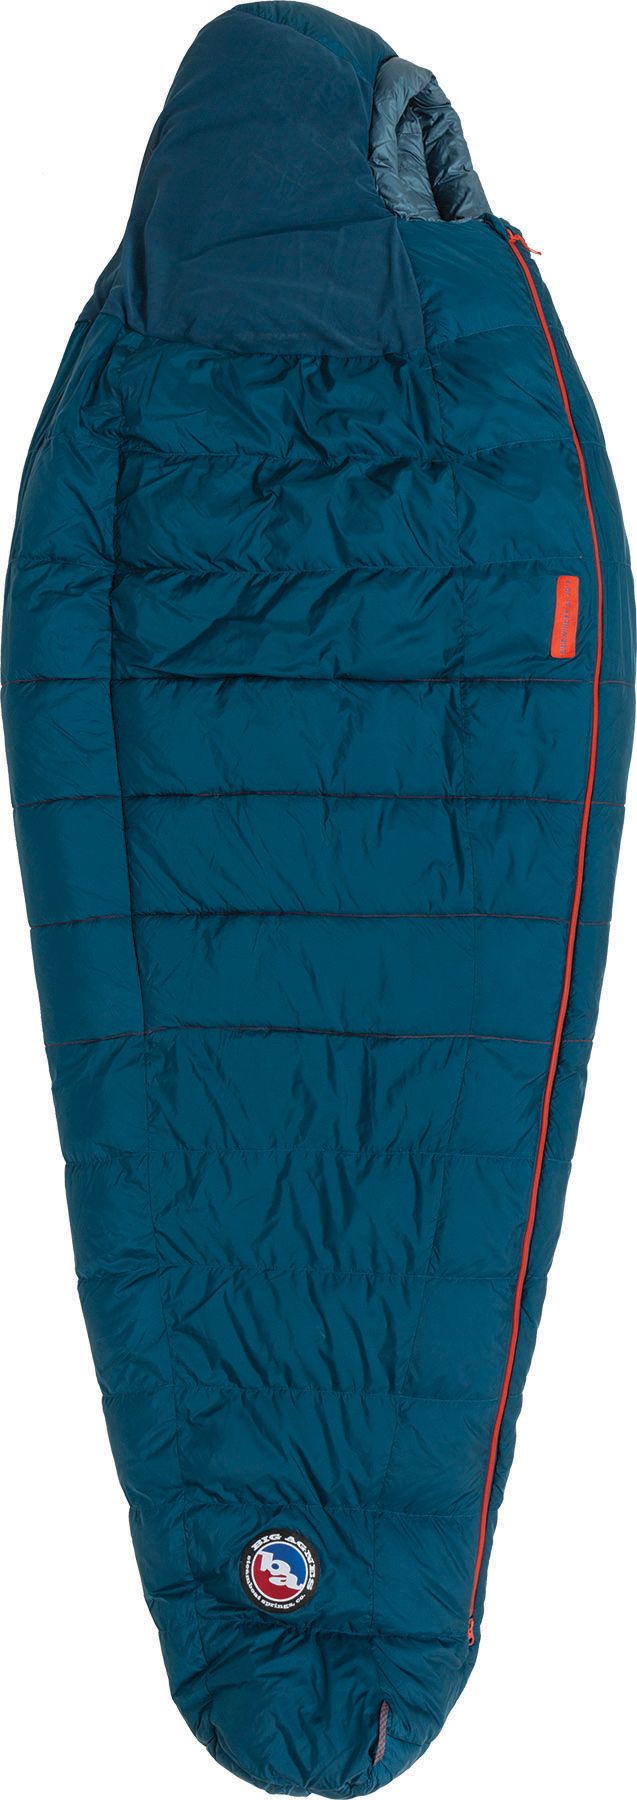 Photos - Other Bags & Accessories Big Agnes Sidewinder SL 20 Sleeping Bag, Men's, Long, Legion Blue/Tapestry 